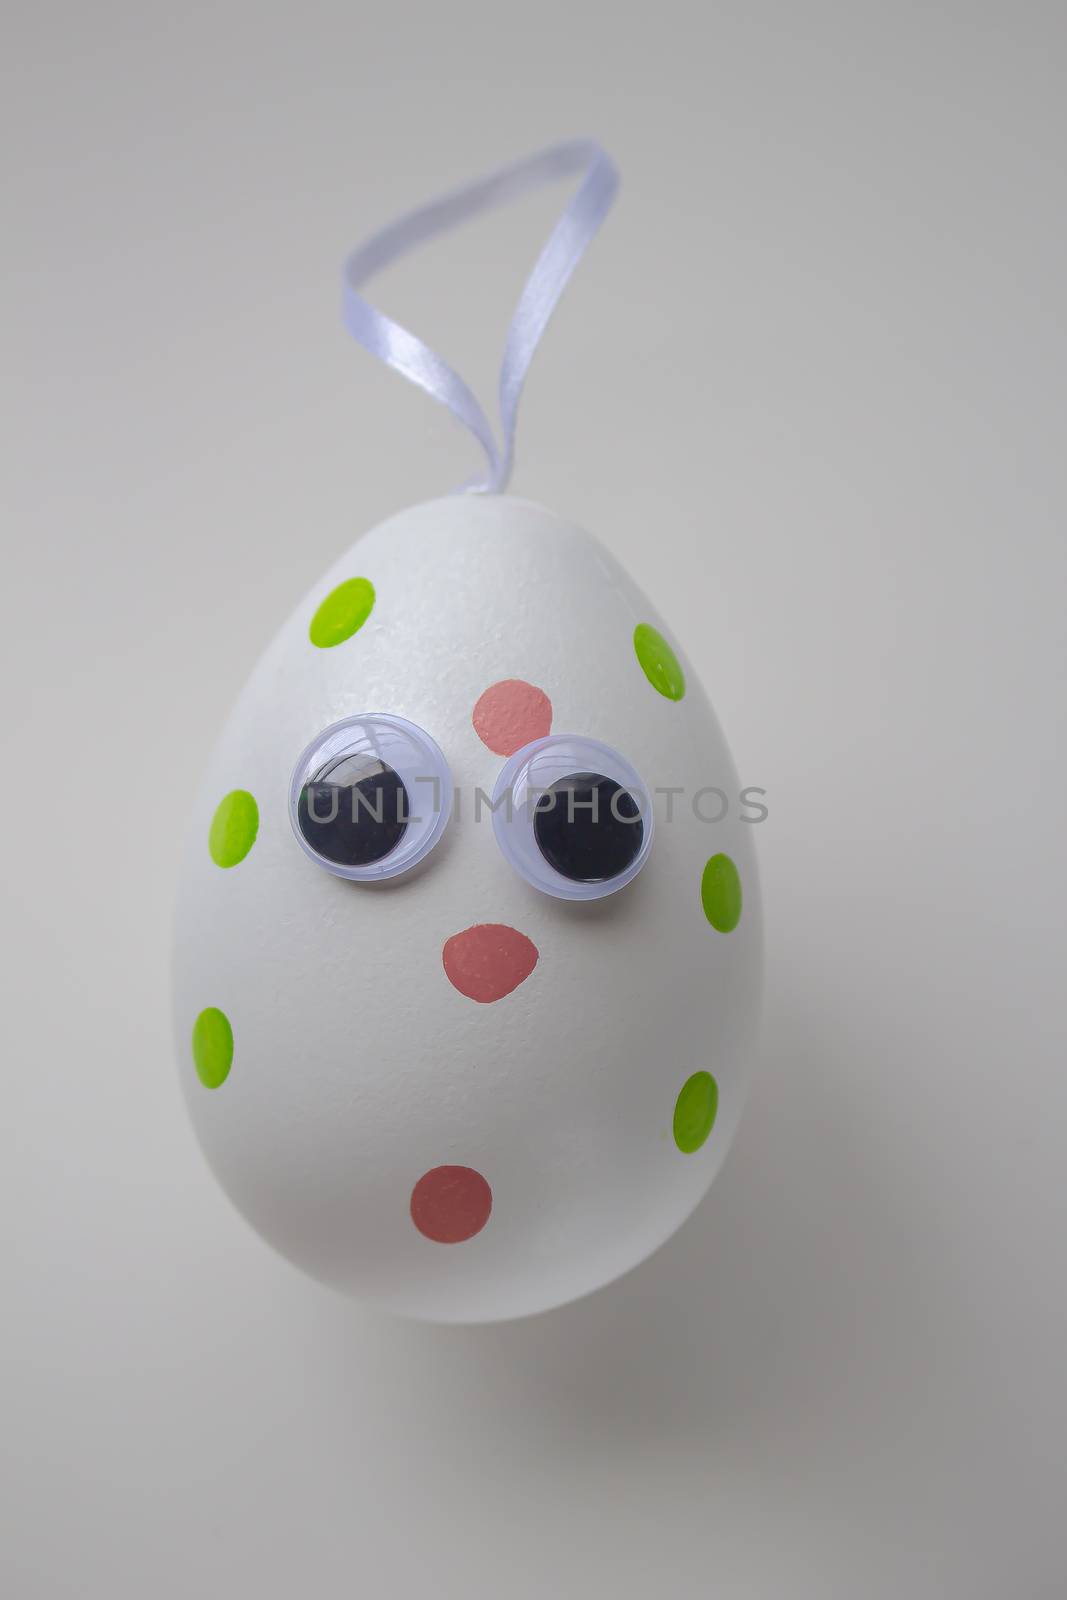 An Easter Egg with a hanger on a white background by oasisamuel